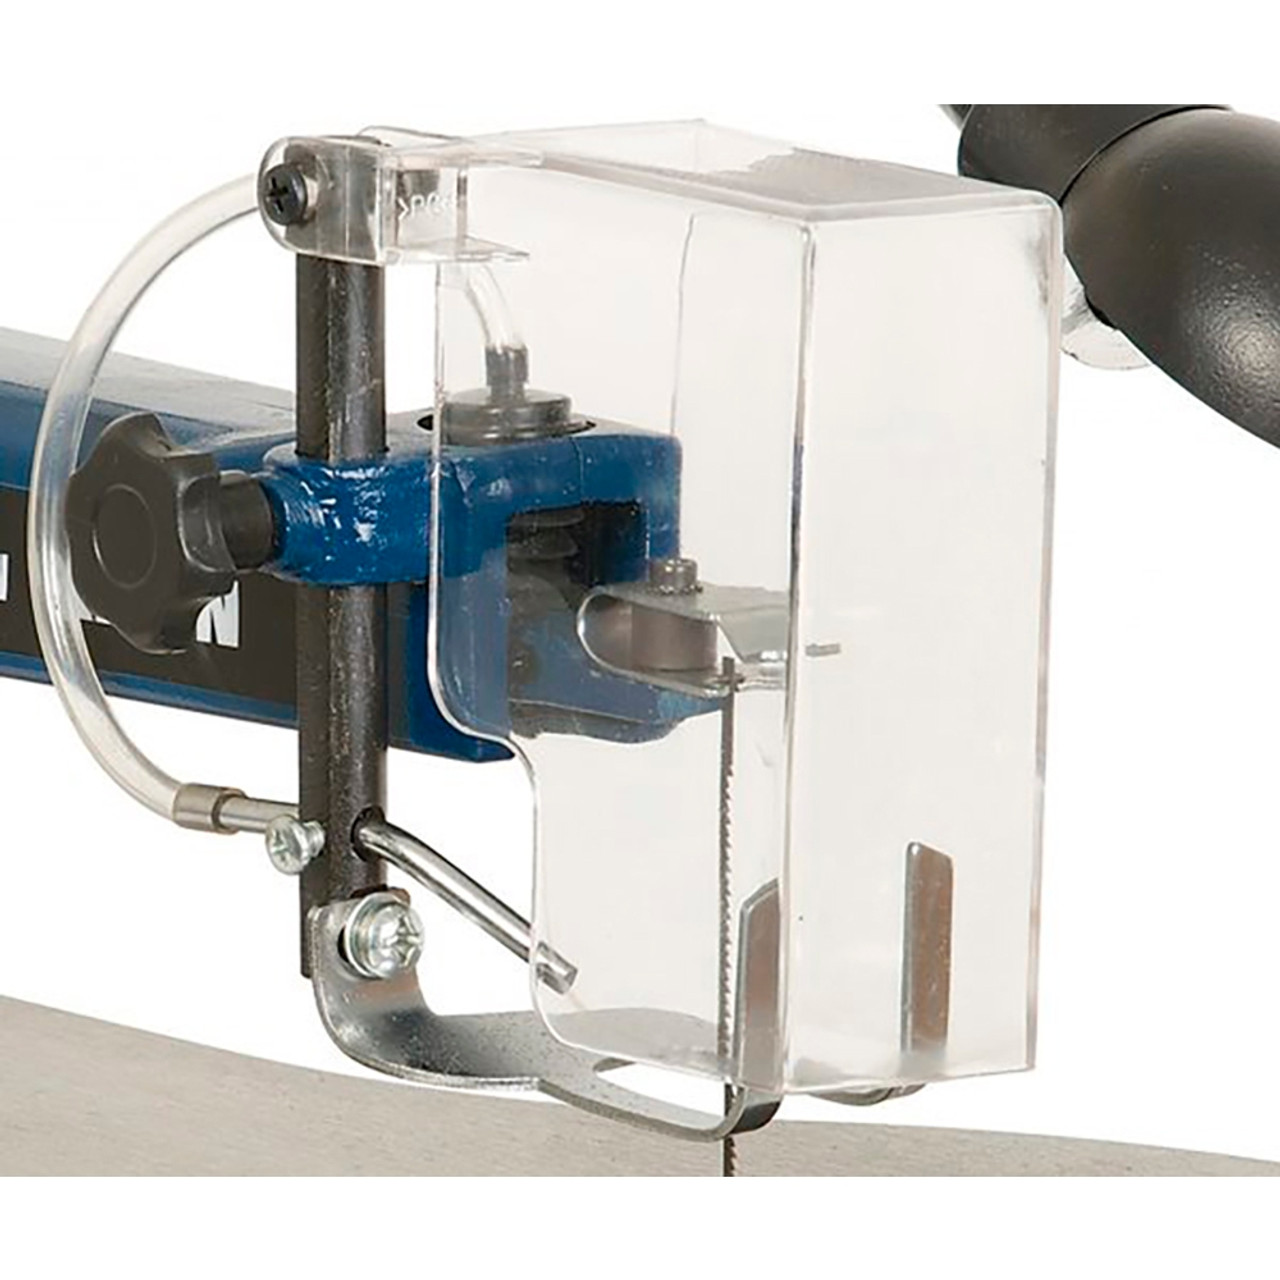 Rikon 10-600VS 16 Inch Variable Speed Scroll Saw with Lamp